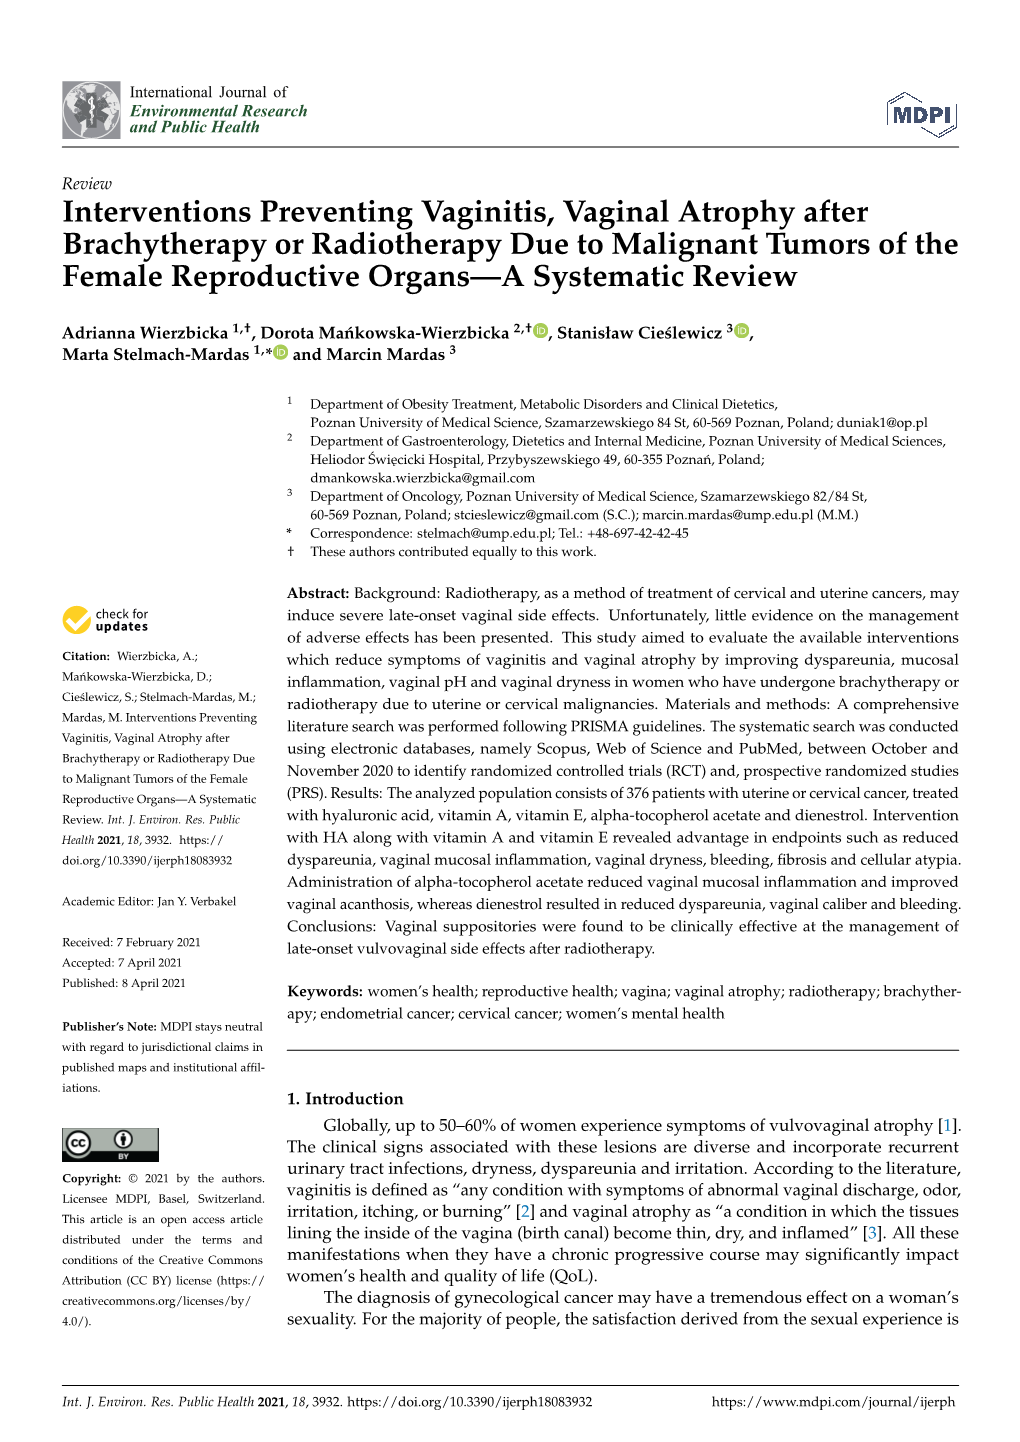 Interventions Preventing Vaginitis, Vaginal Atrophy After Brachytherapy Or Radiotherapy Due to Malignant Tumors of the Female Reproductive Organs—A Systematic Review